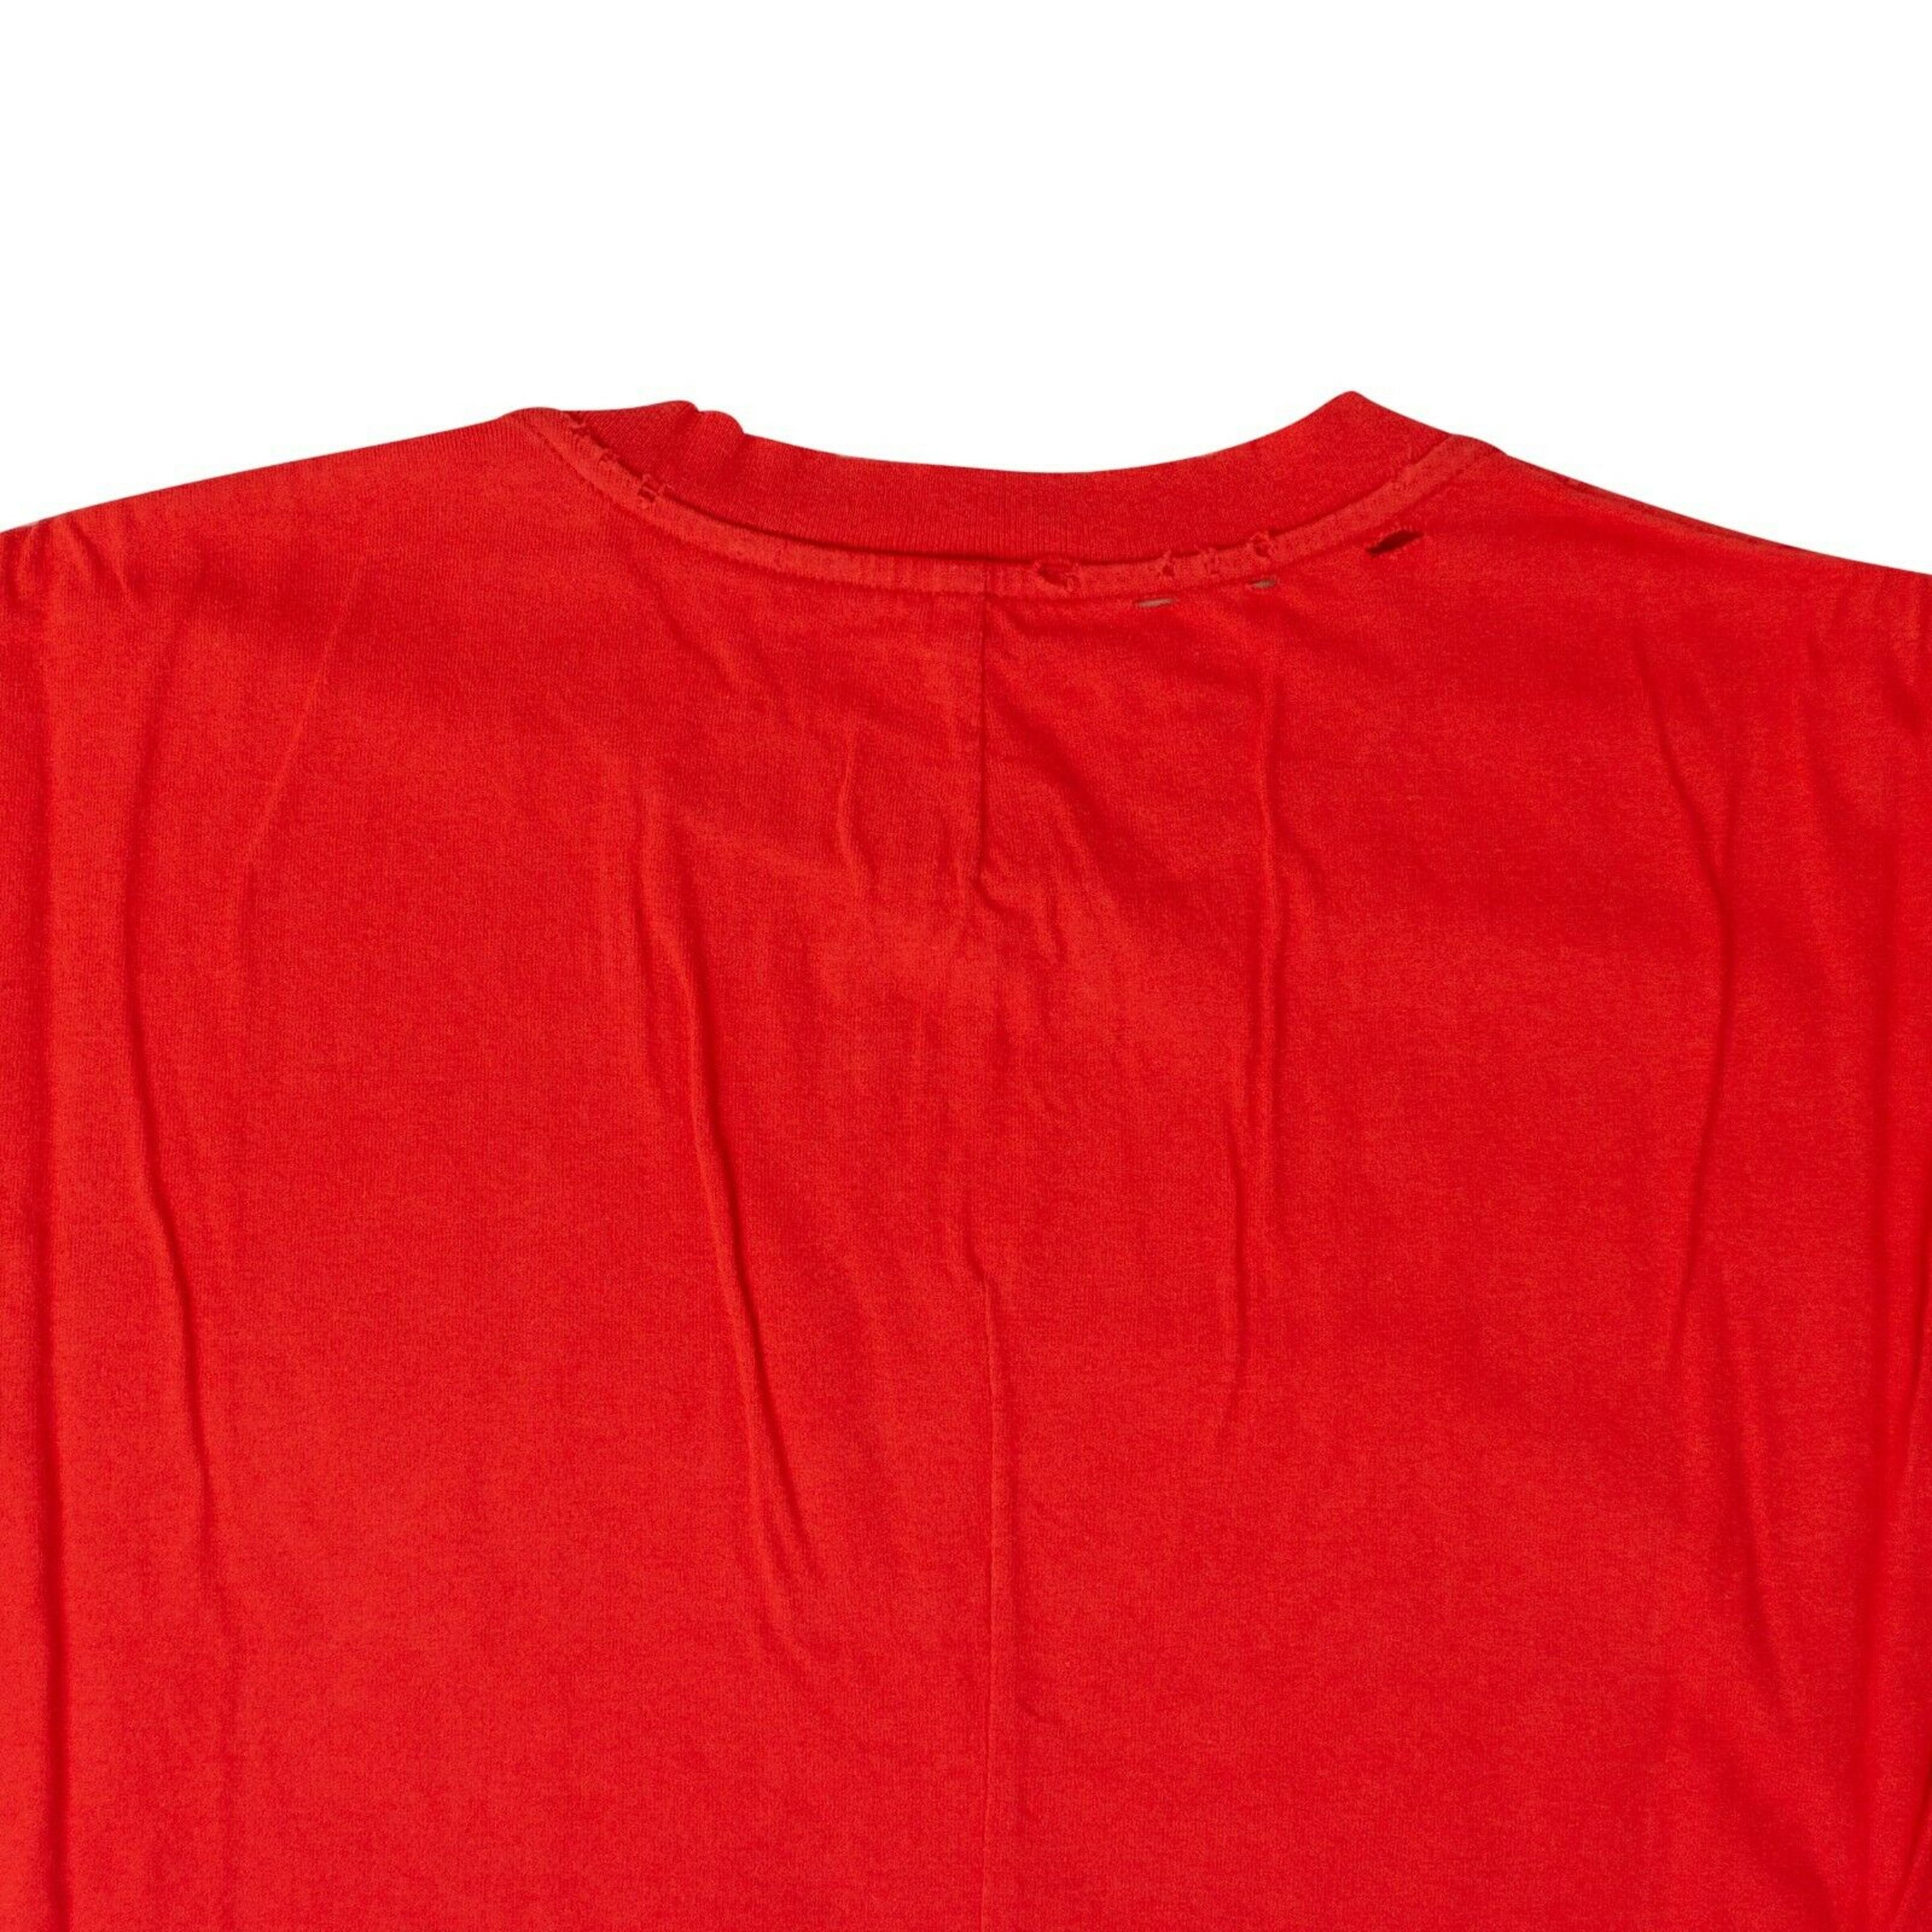 Alternate View 3 of Unravel Project Slogan Print T-Shirt - Red